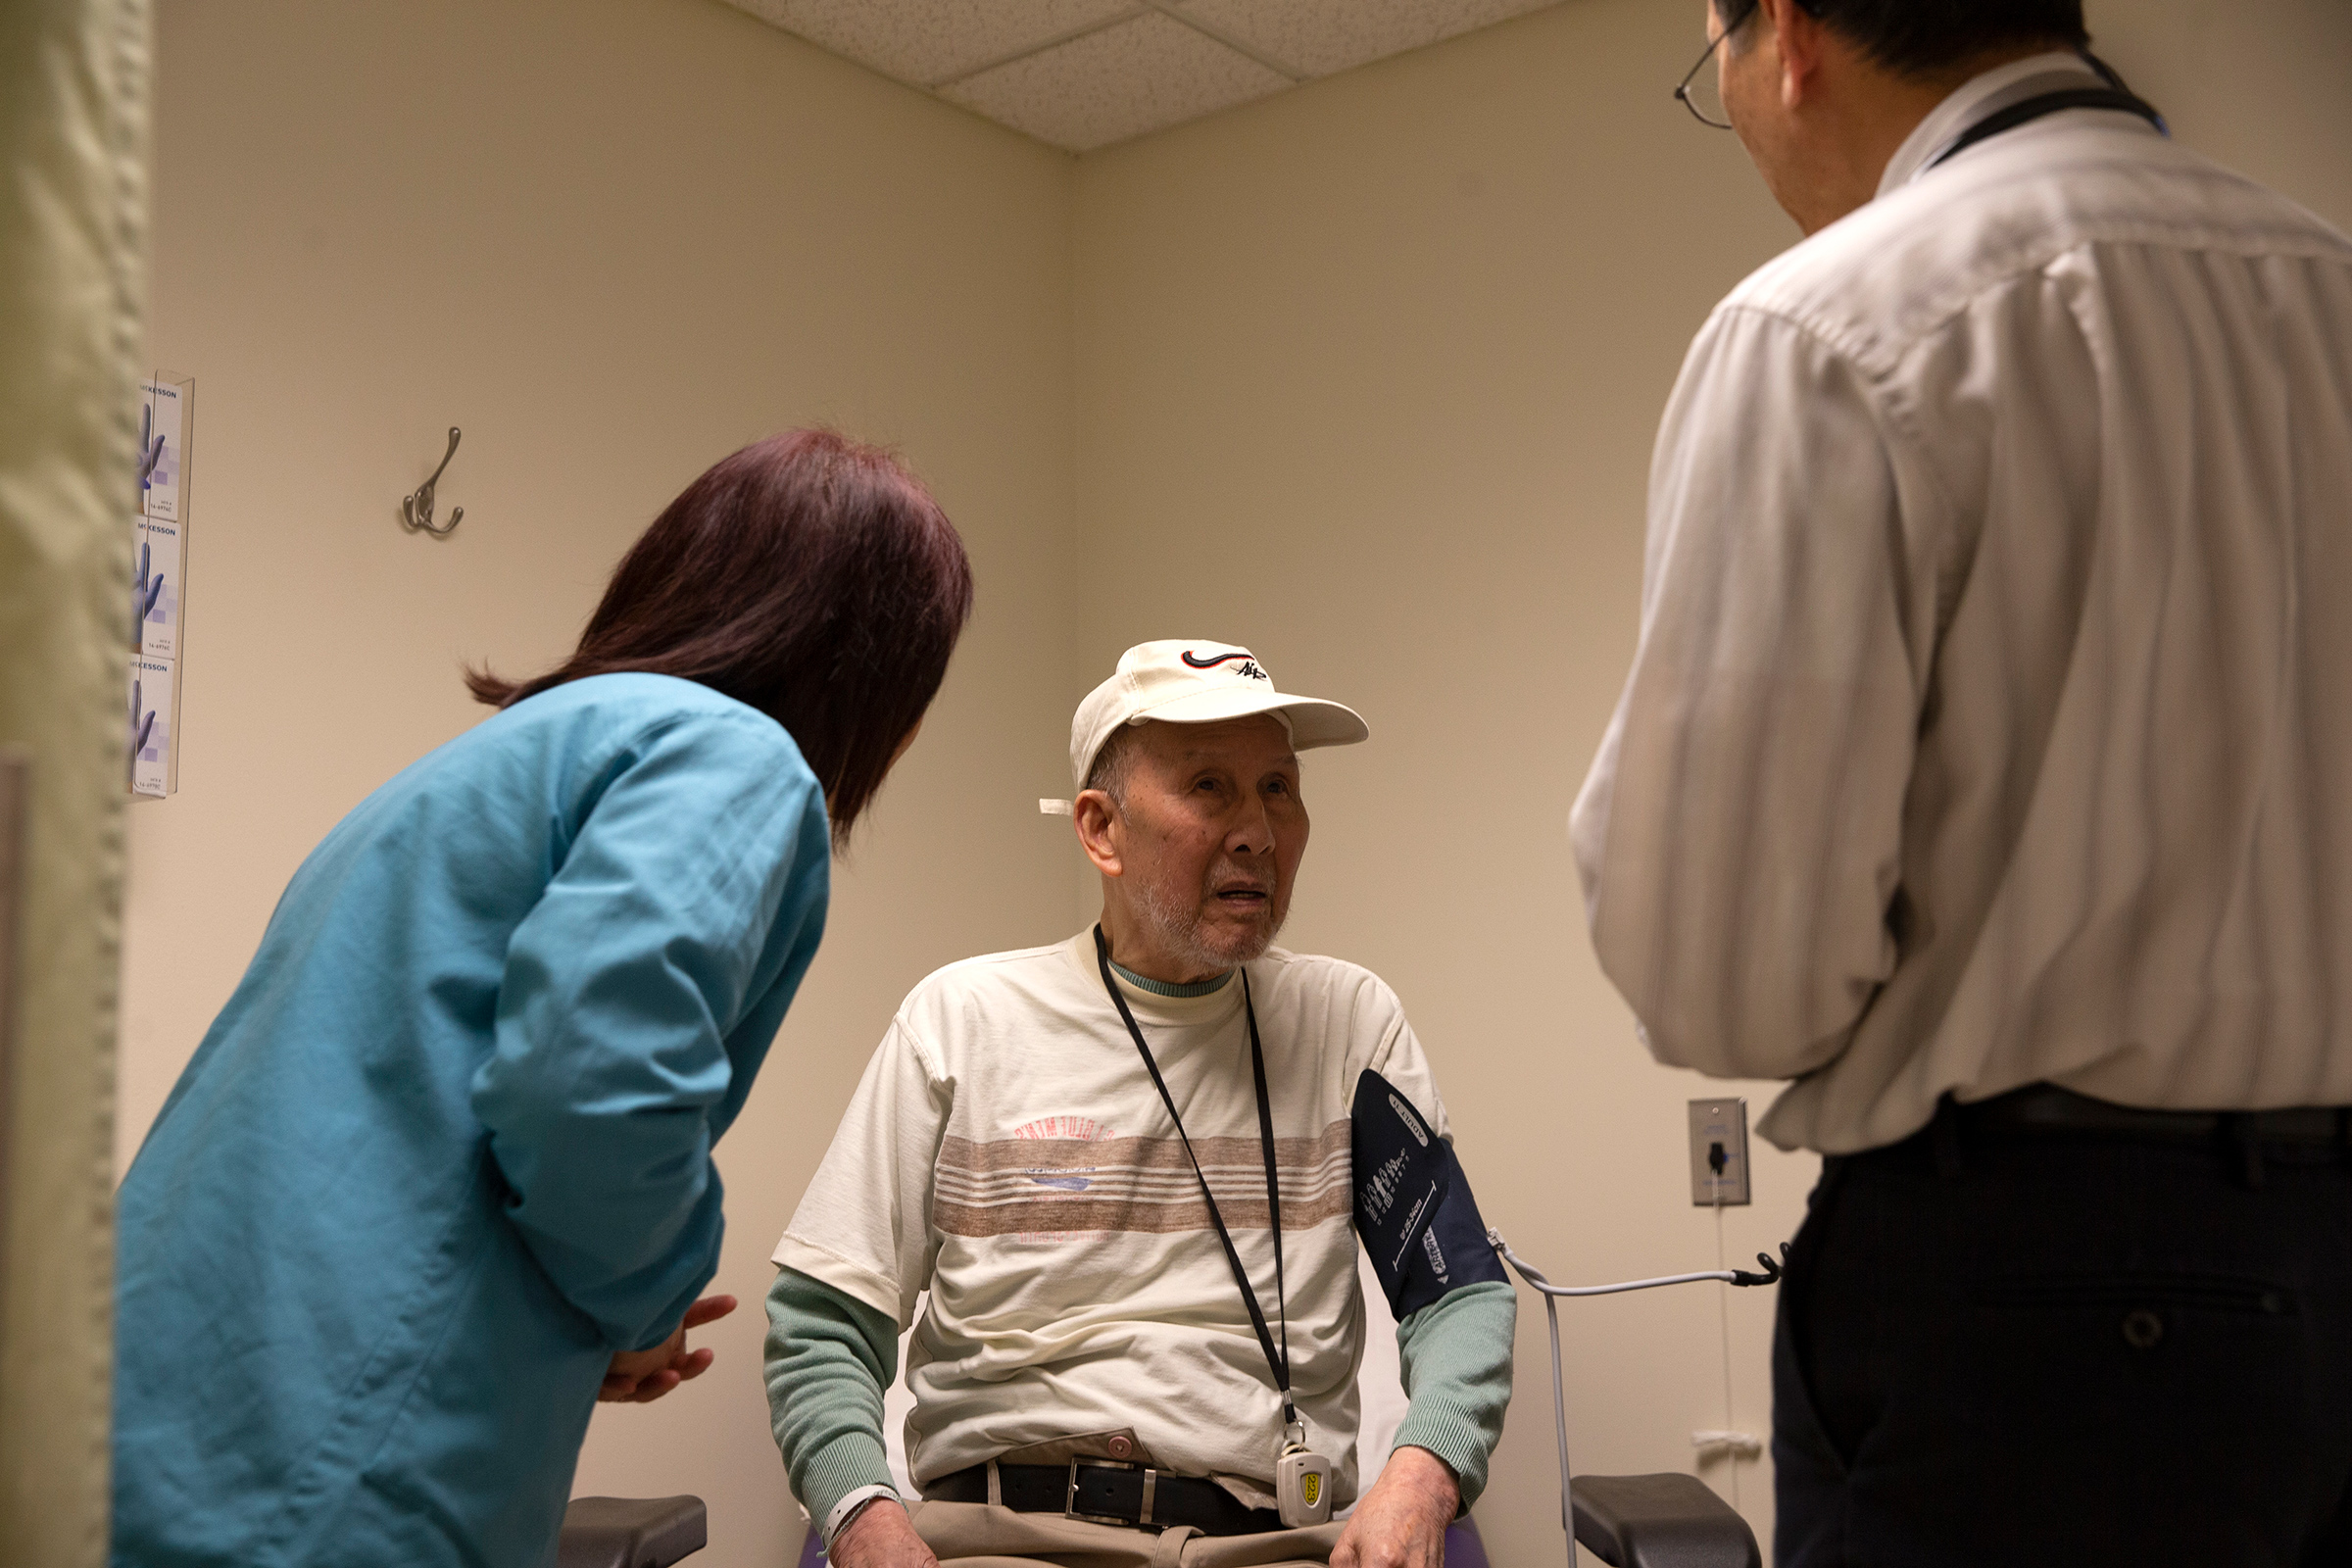 Bing Hong Liu (C) talks to to Dr. Alan Chun (R) through an interpreter at the International Community Health Services medical clinic in their assisted living facility, the Legacy House, on March 20 in Seattle. (Karen Ducey—Getty Images)